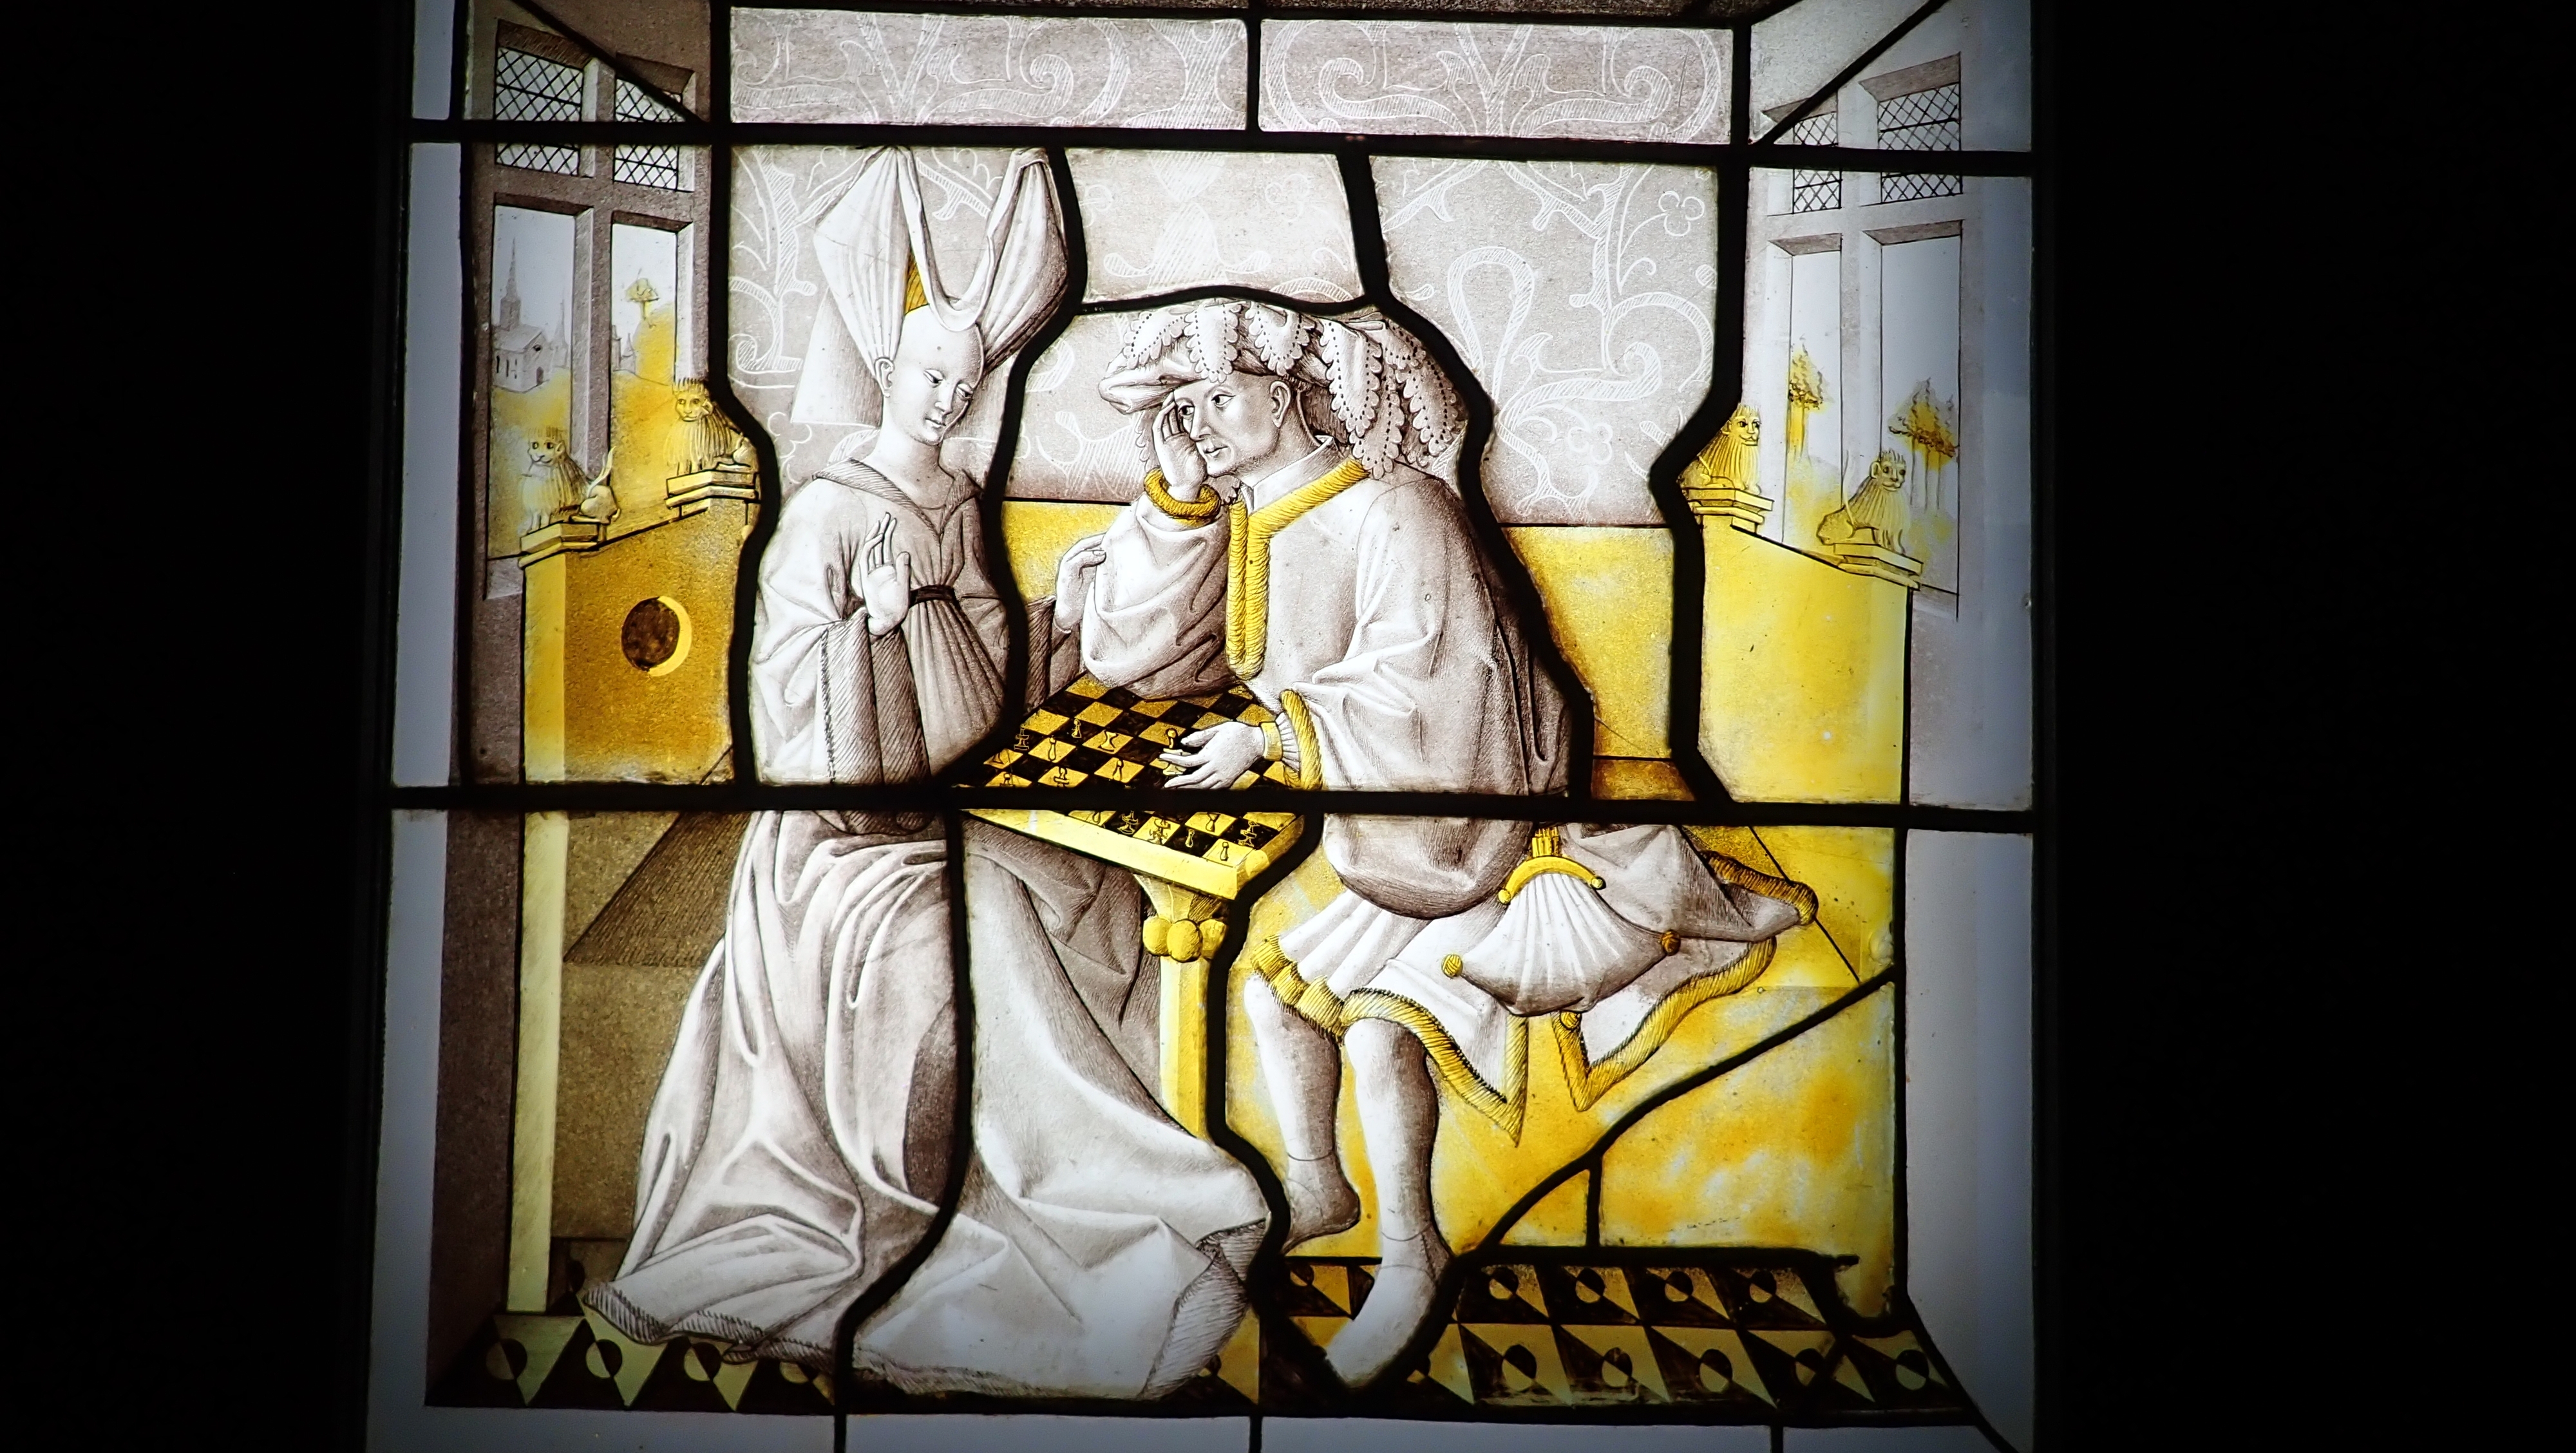 1450 (approx) - Cluny museum - Window "The joys of chess" - France